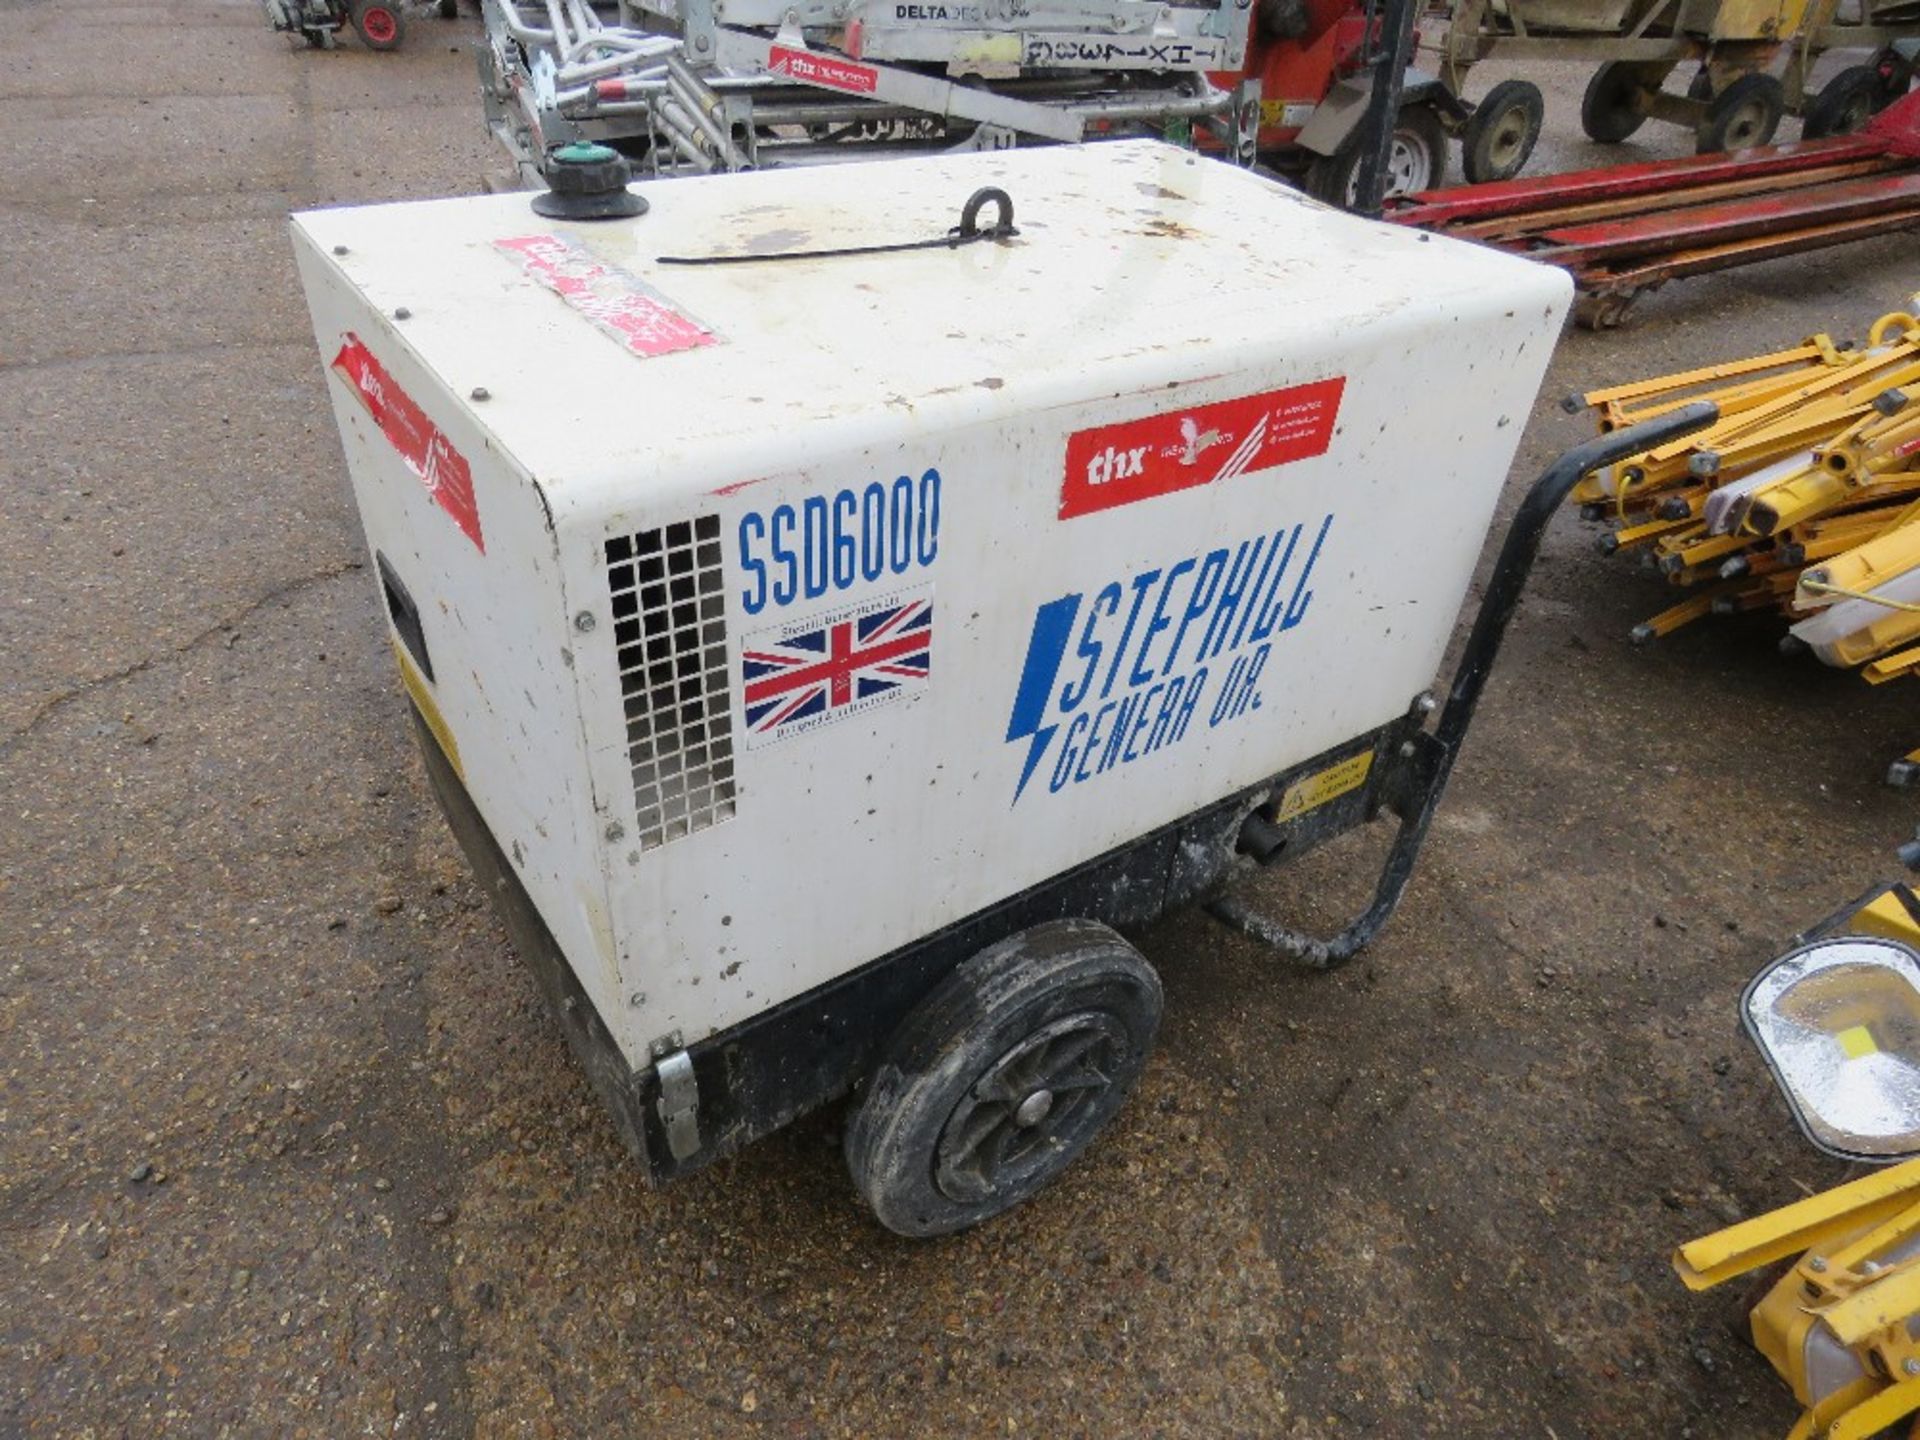 STEPHILL 6KVA BARROW DIESEL GENERATOR. WHEN TESTED WAS SEEN TO RUN, OUTPUT UNTESTED. THX9750 - Image 4 of 8